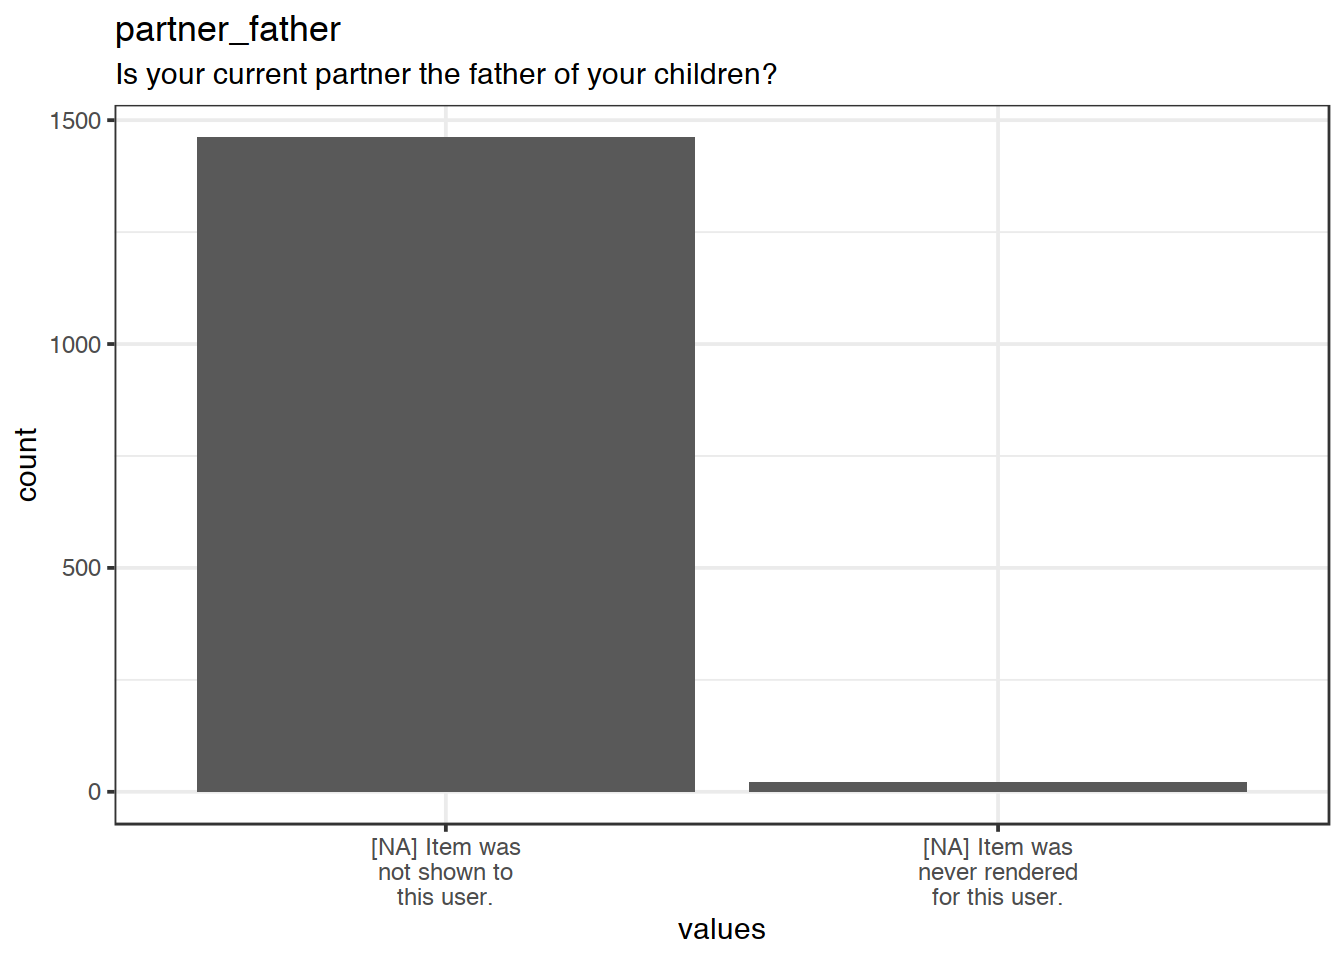 Plot of missing values for partner_father